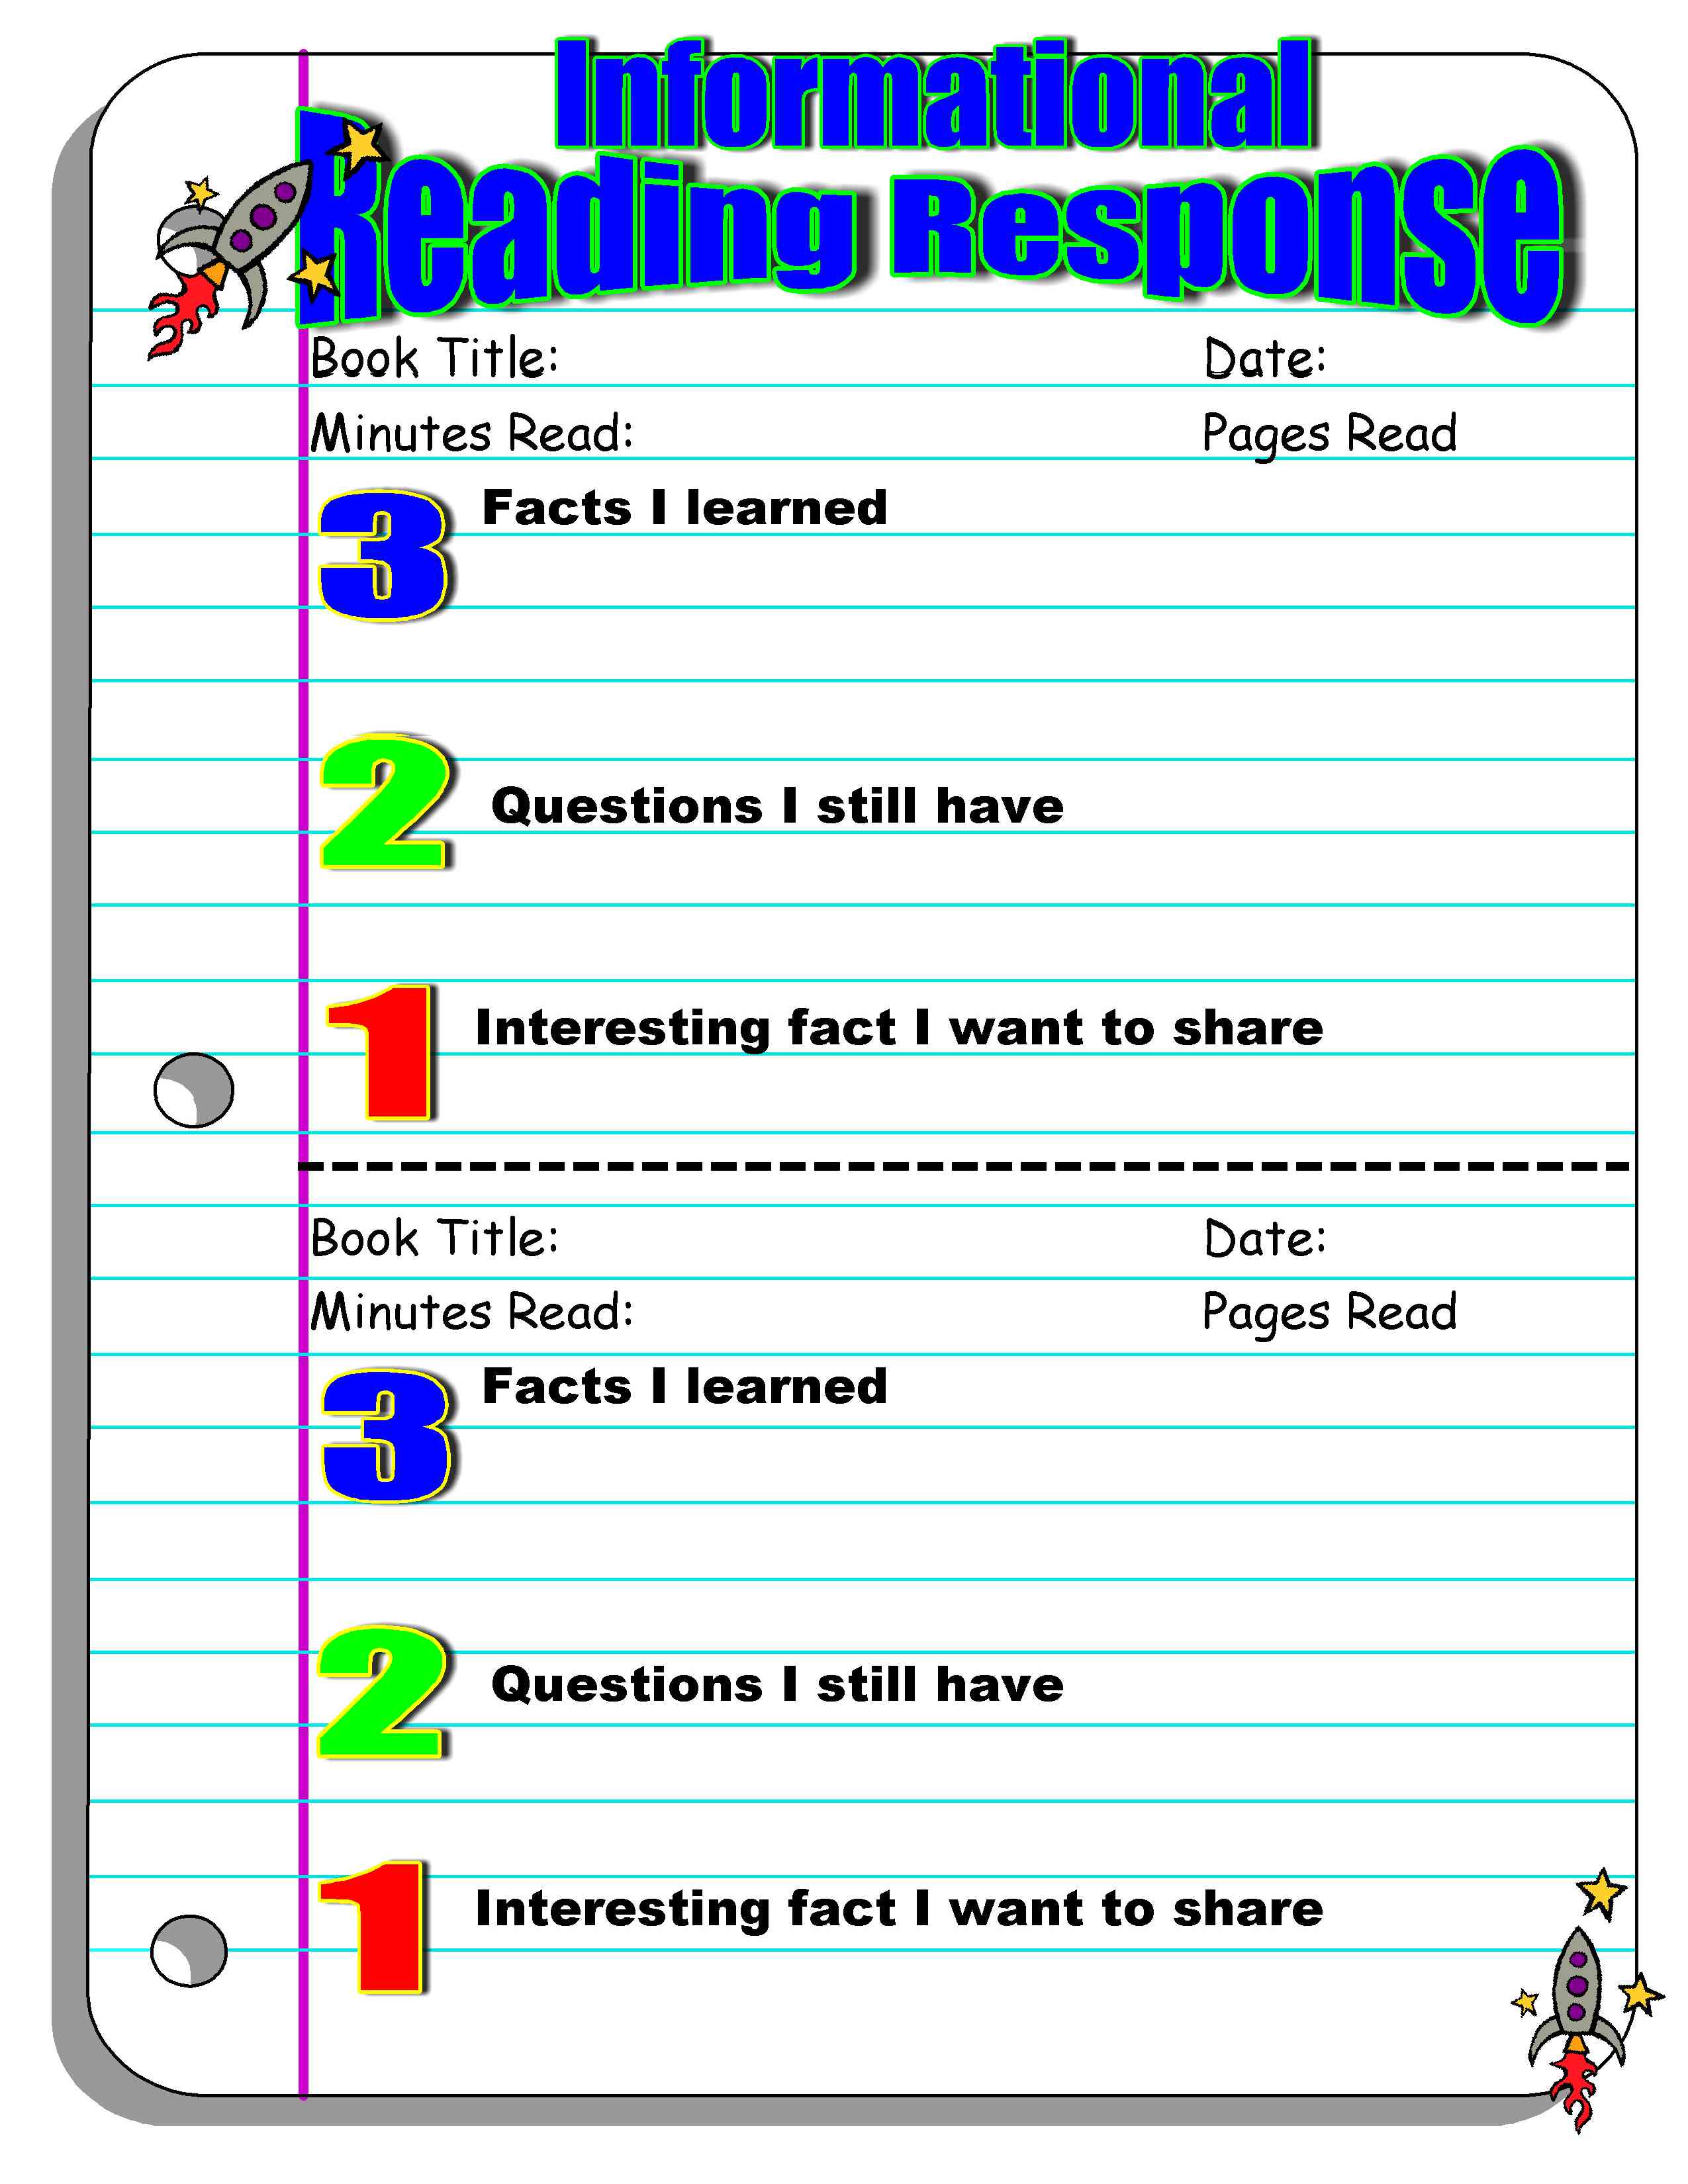 reading response template nceac